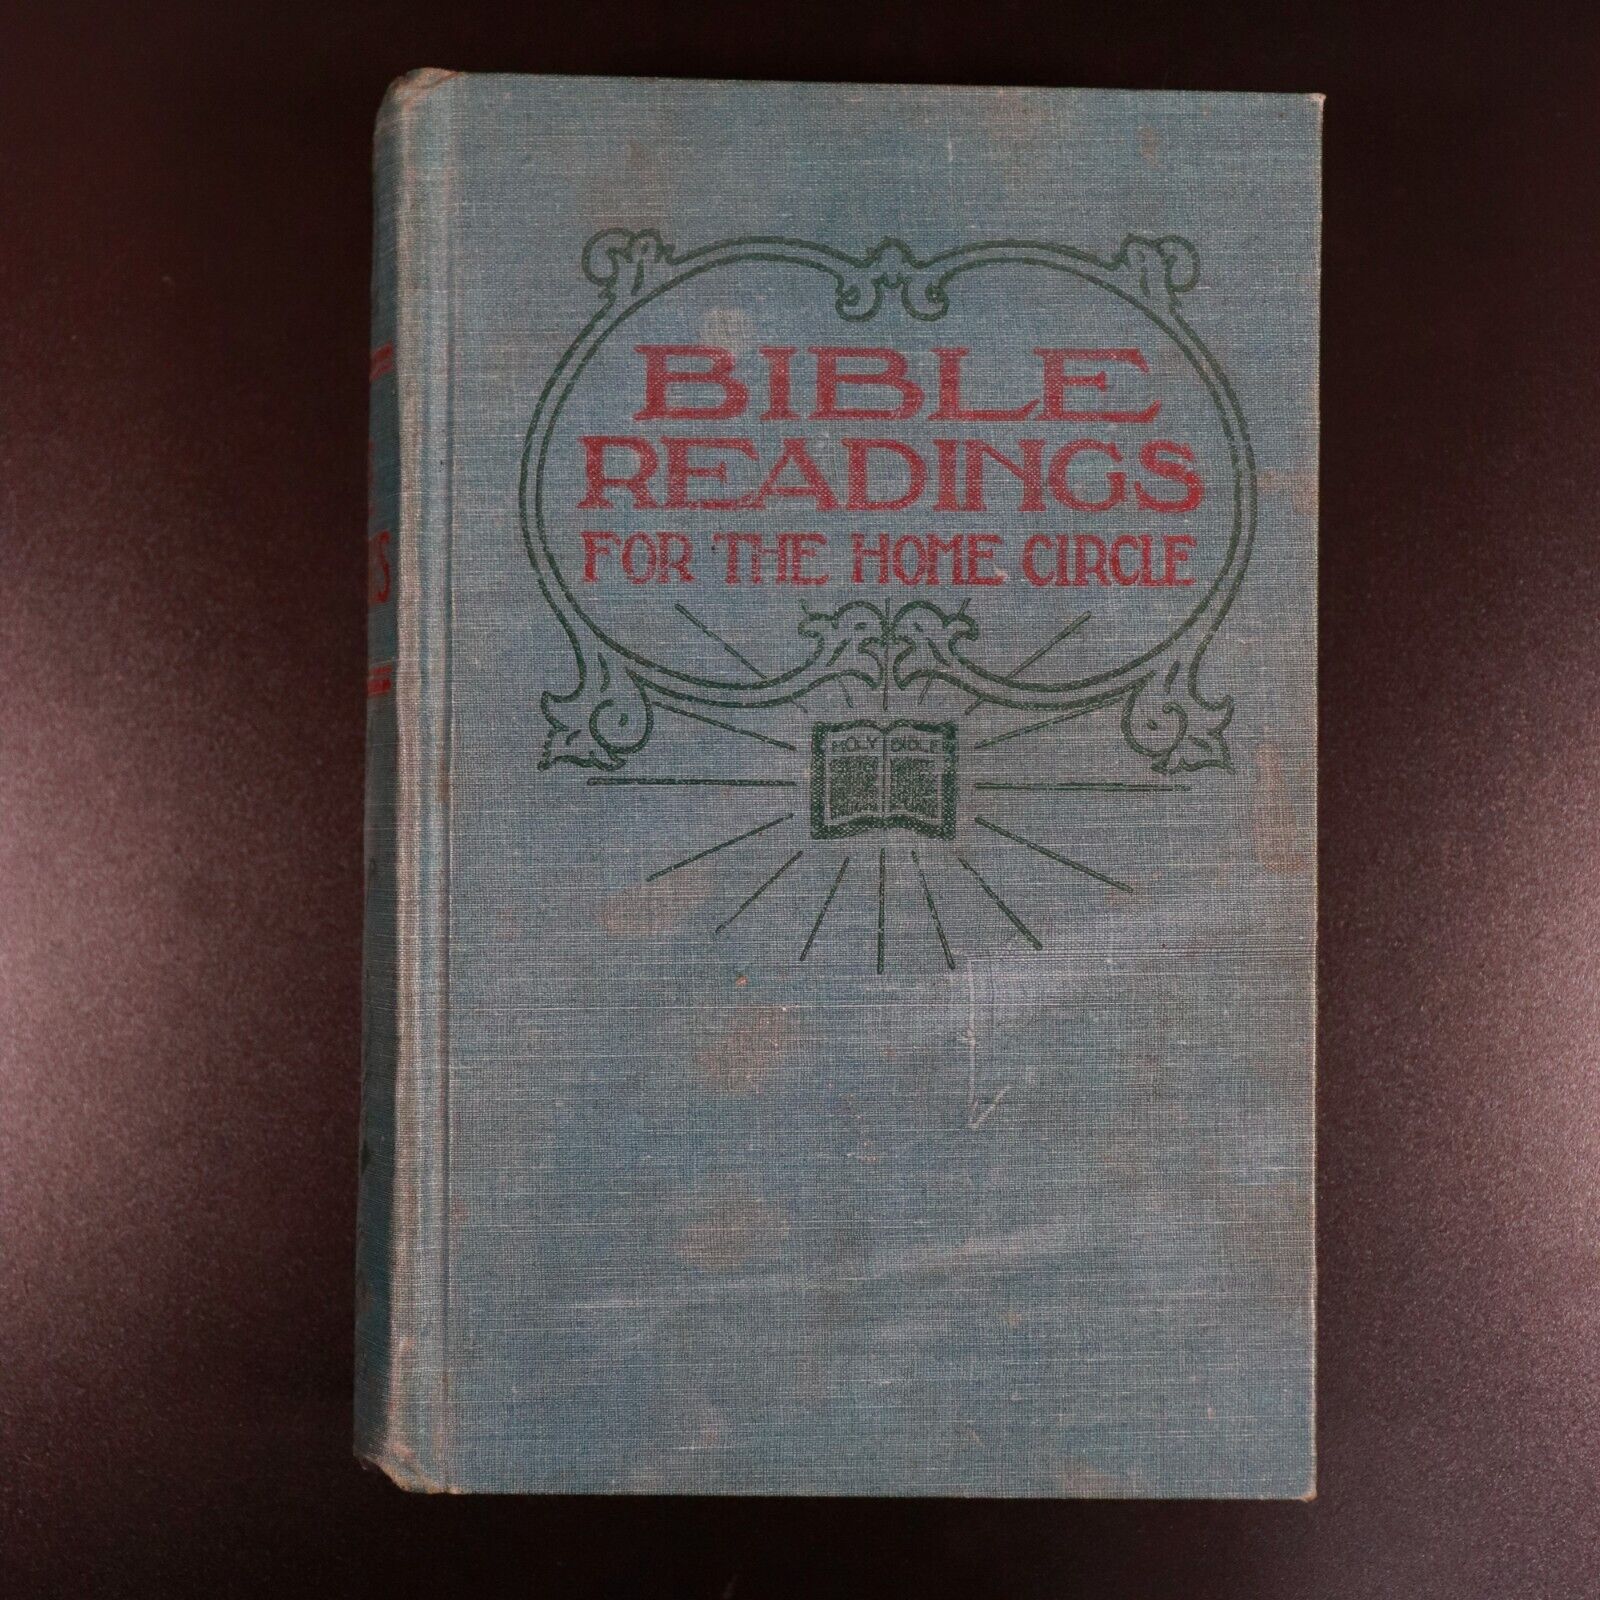 1915 Bible Readings For The Home Circle - Antique Religious Book Christianity